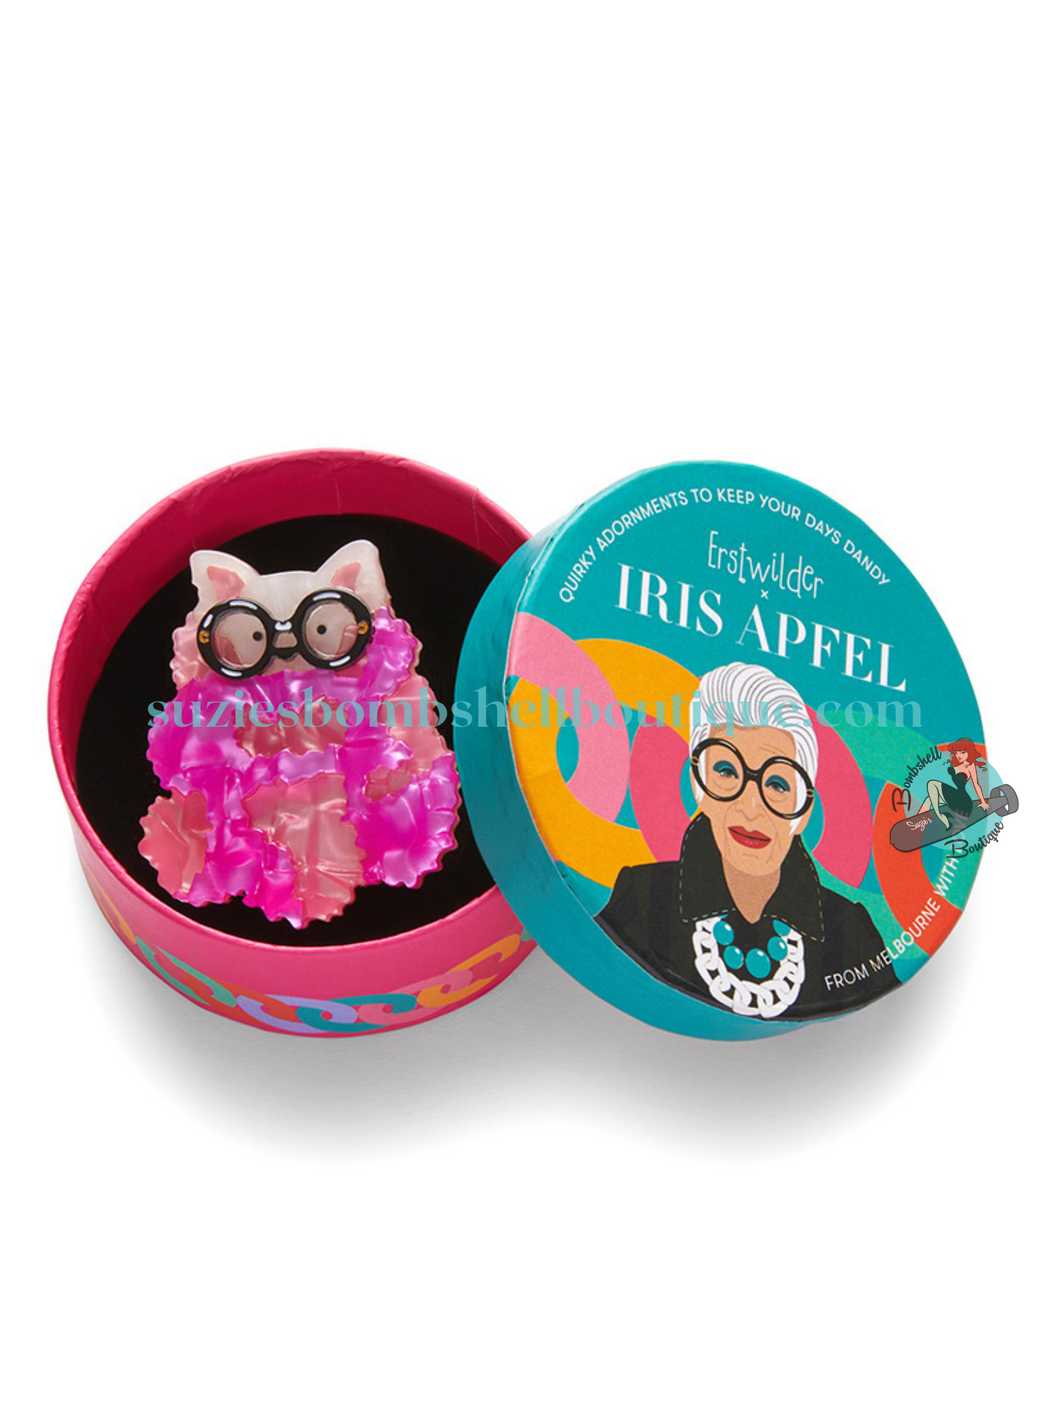 Erstwilder Canada Erstwilder x Iris Apfel A Pooch Amongst the Pom Poms Mini Brooch lapel pin of white dog wearing big black glasses and pink feather boa acrylic resin costume jewellery jewelry altfashion quirky pinup accessories Canadian Pin-Up Shop Suzie's Bombshell Boutique